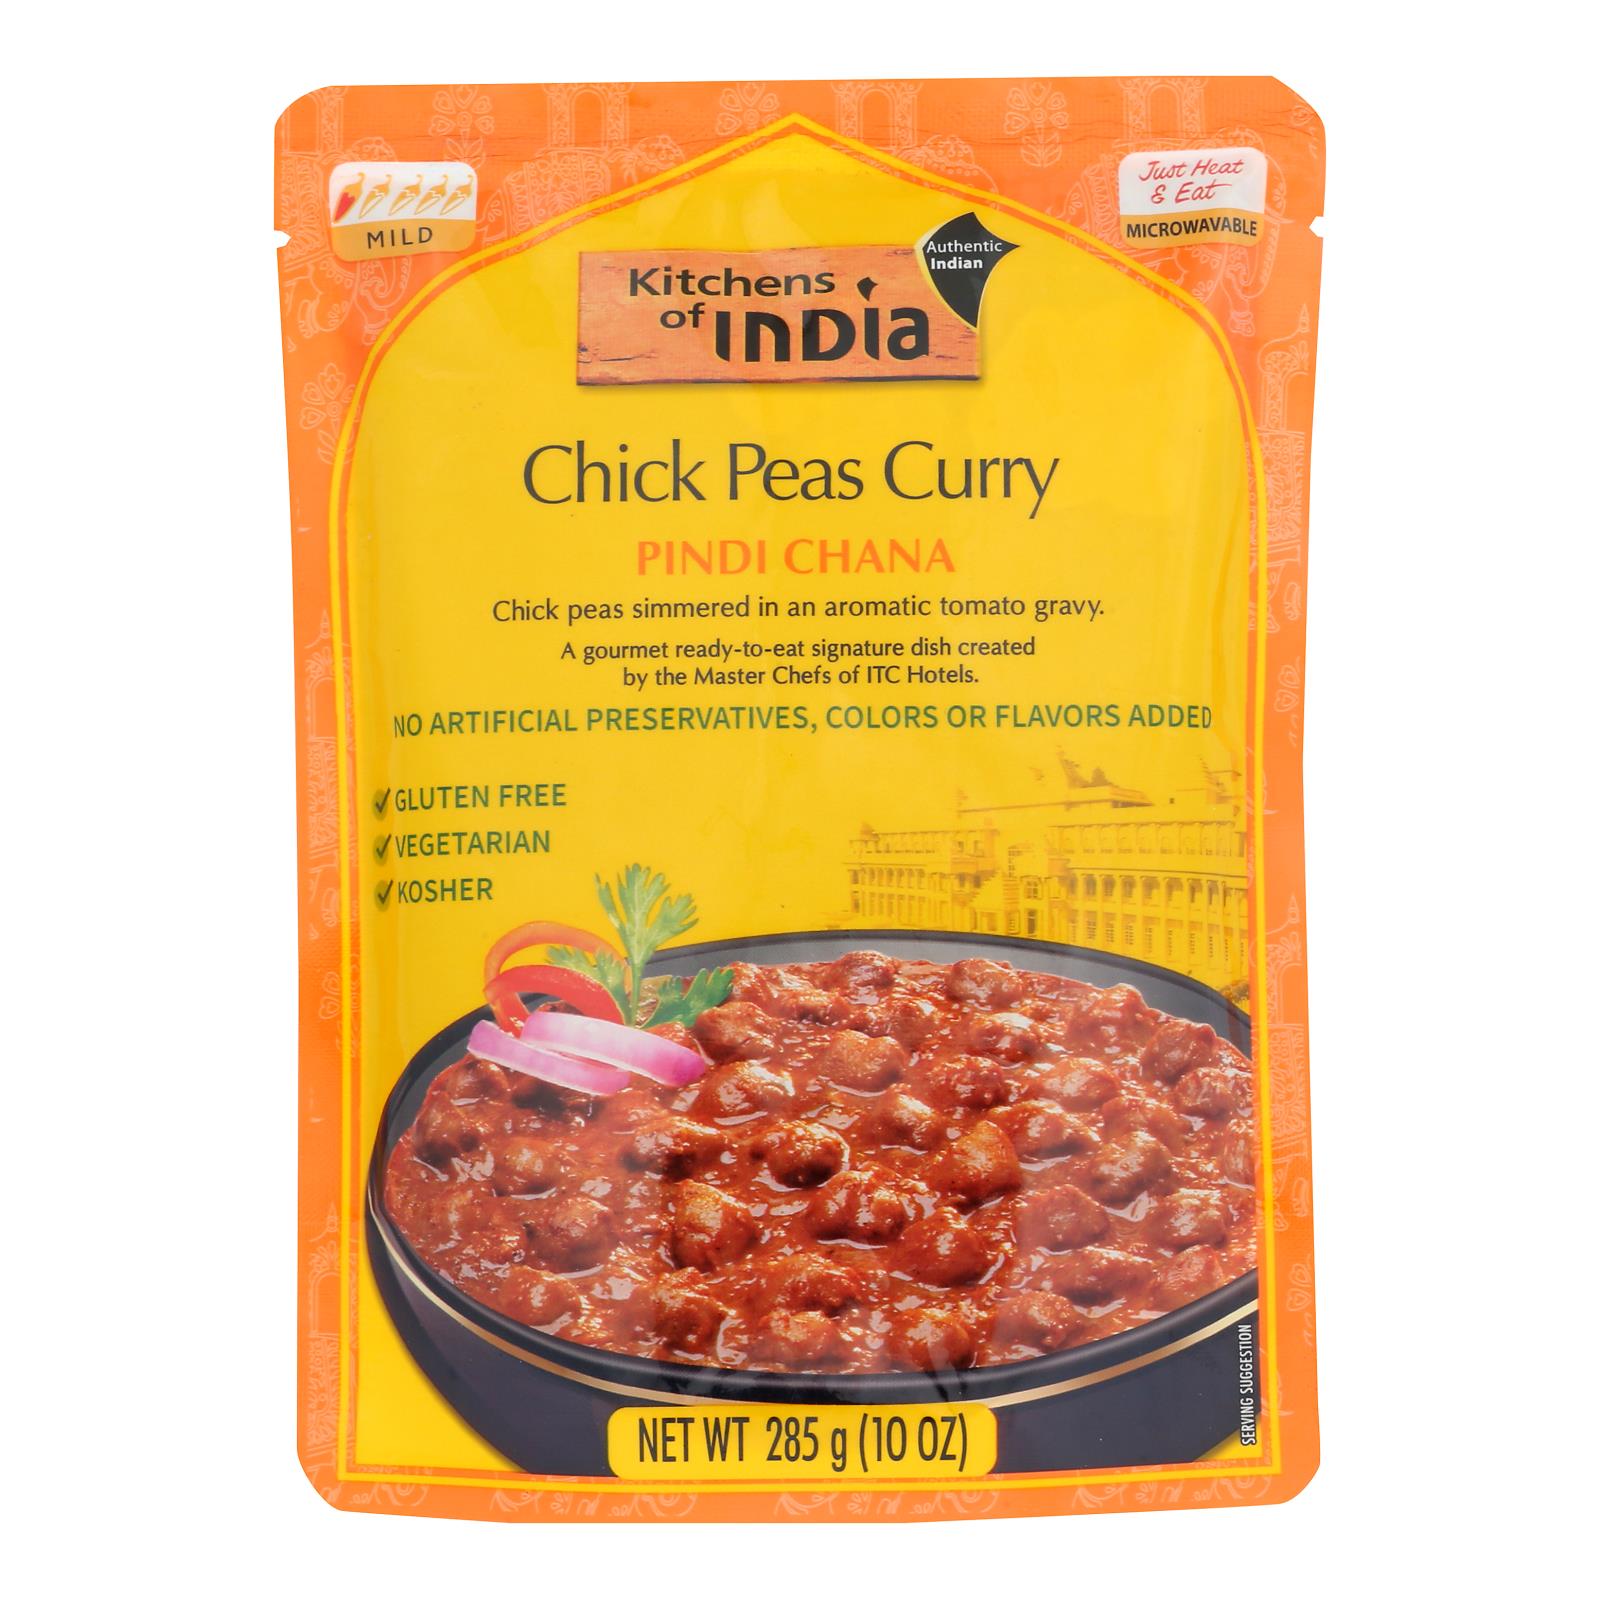 Kitchen Of India Dinner - Chick Peas Curry - Pindi Chana - 10 Oz - Case Of 6